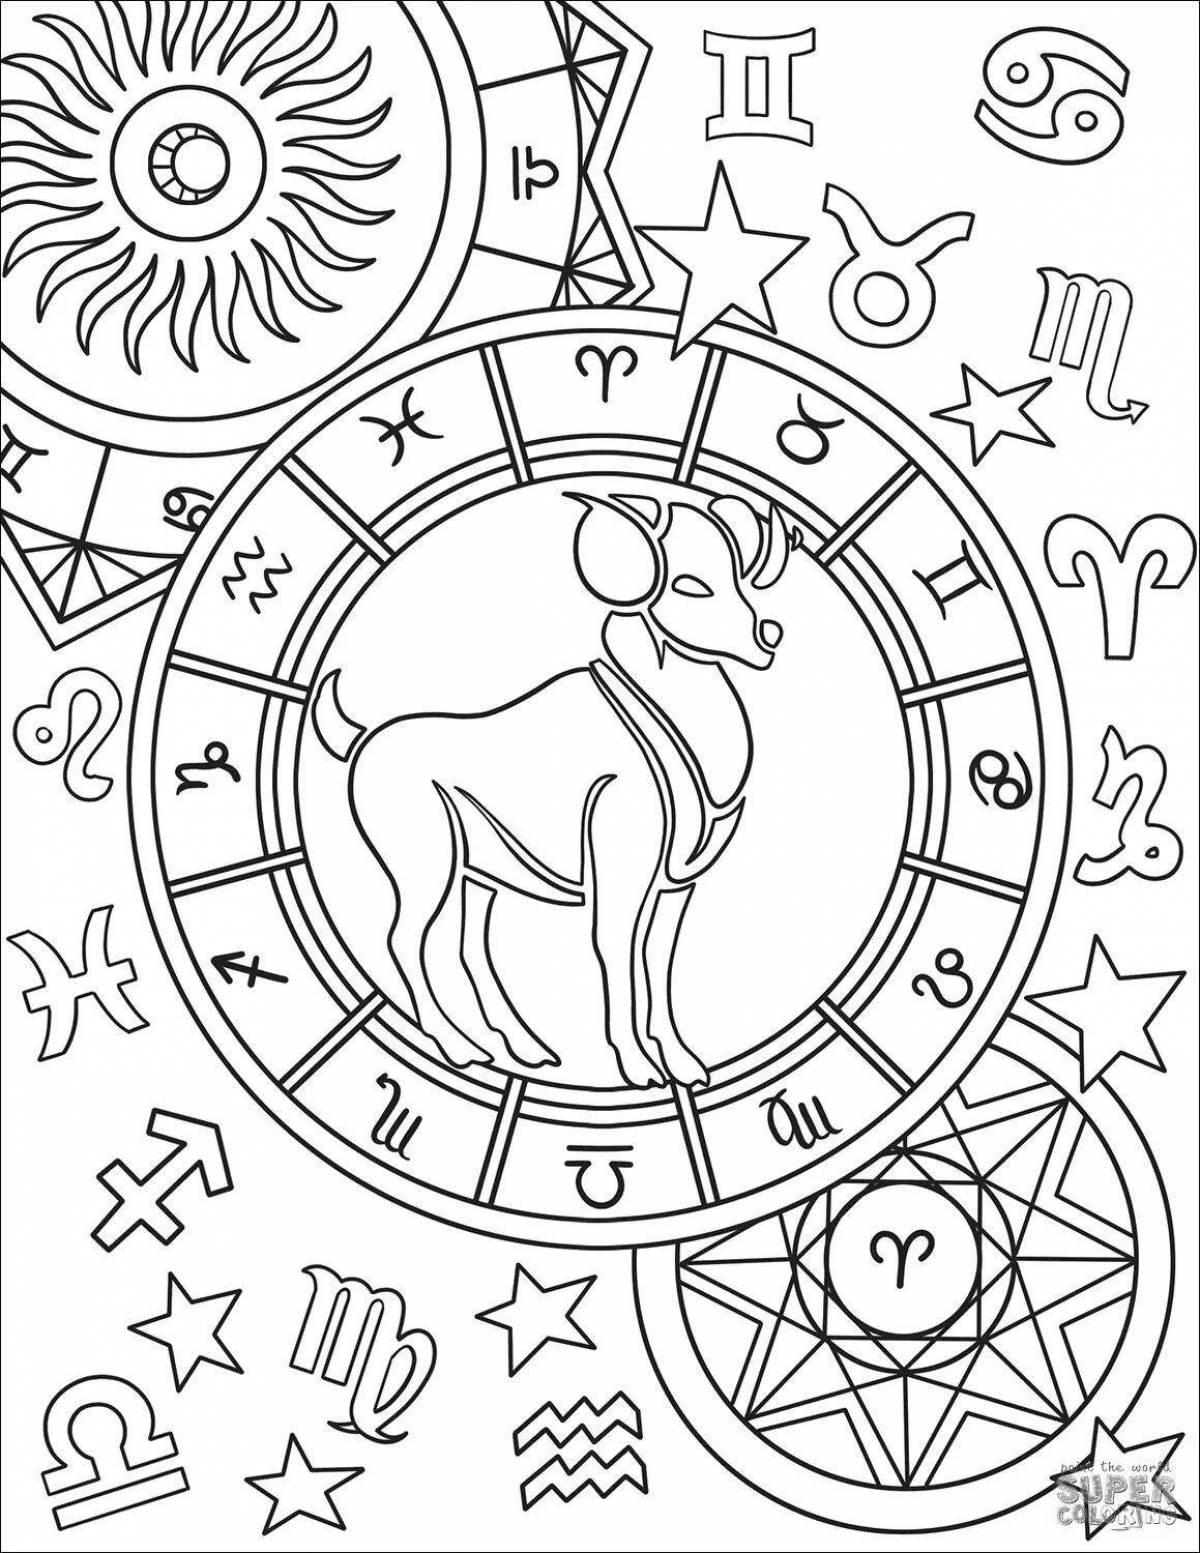 Colorful zodiac coloring page